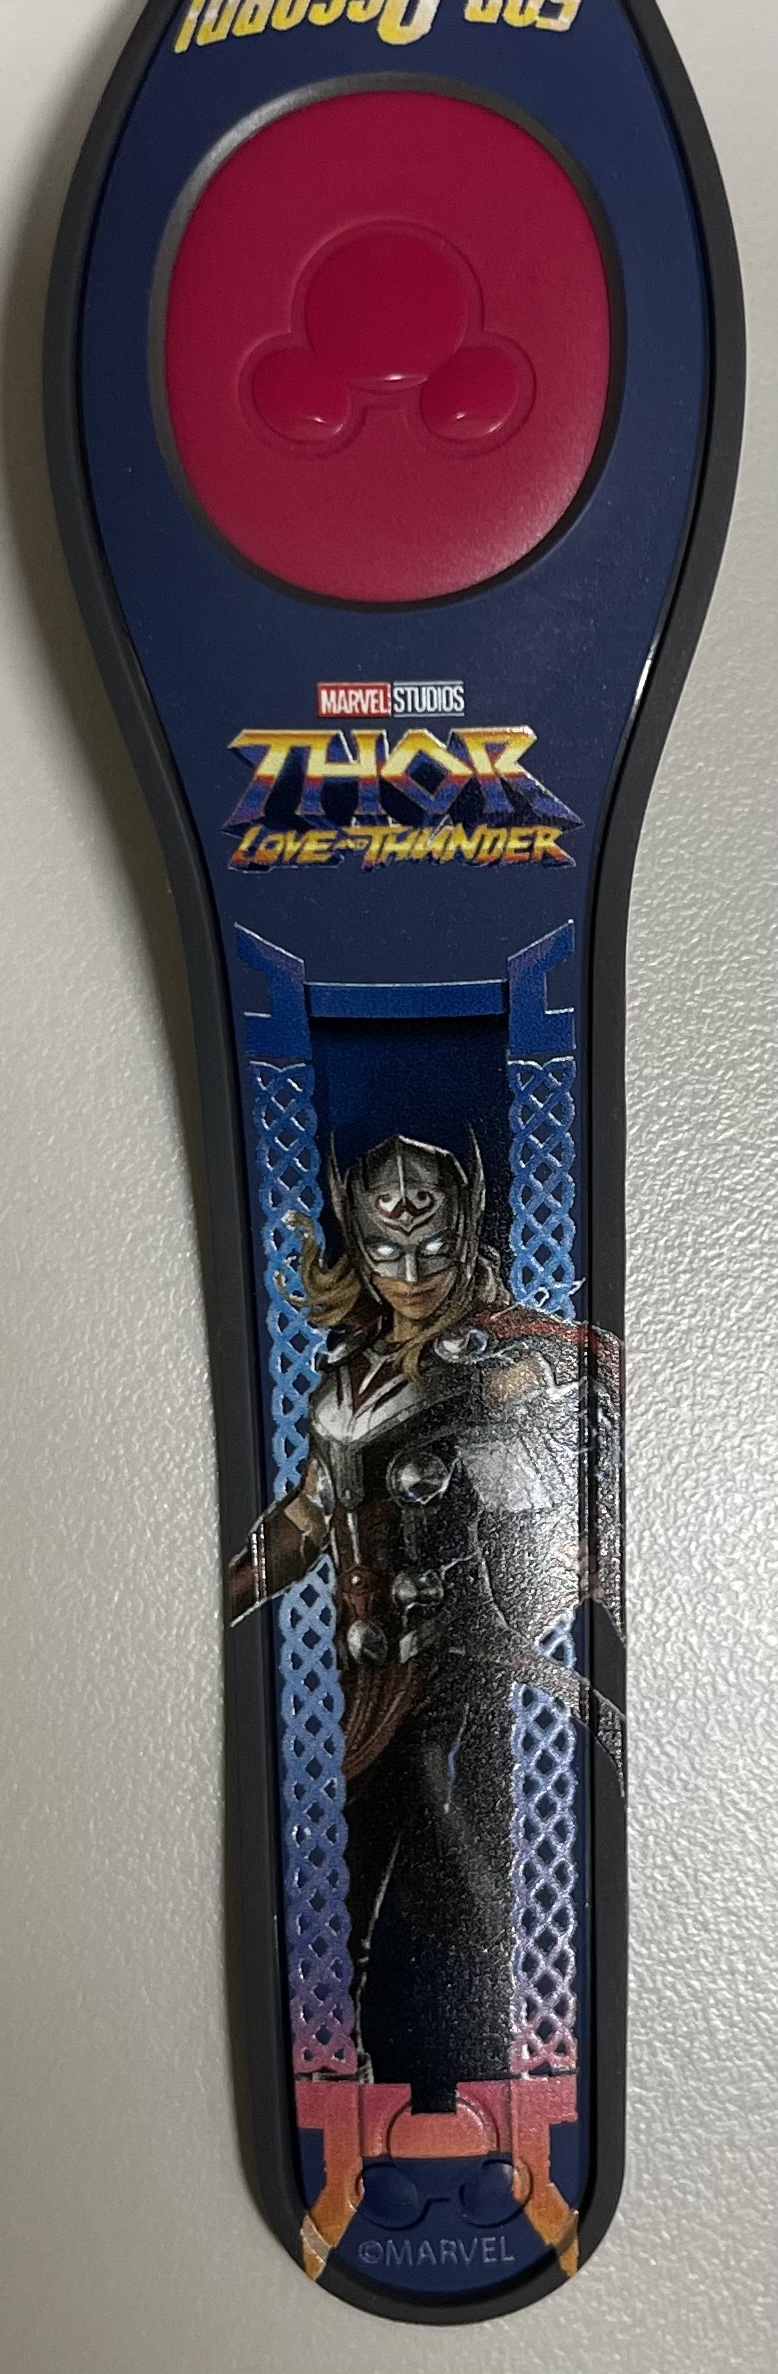 Thor: Love and Thunder Limited Edition 4520 band now available